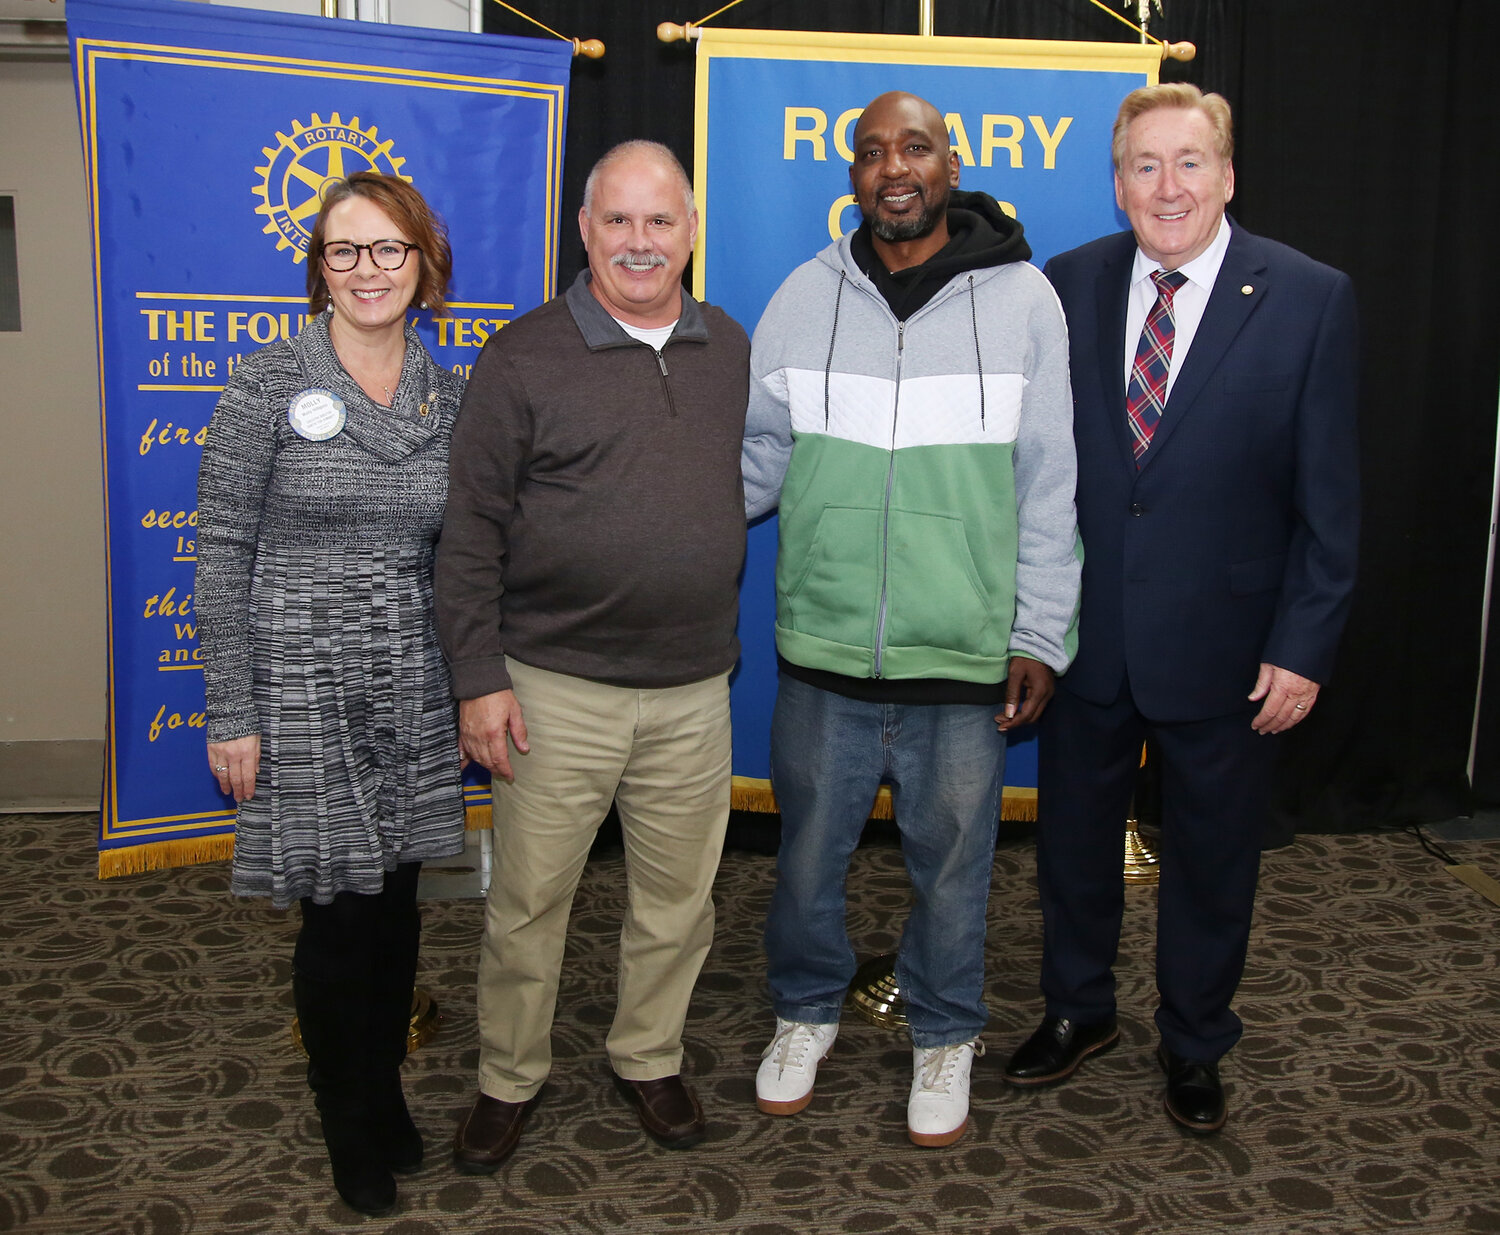 From left, Molly Hilligoss, president of the Rotary Club of Wicomico County, "Hero Award" recipients Bill Suess and Alfred Johns, and ceremony emcee Don Hackett pose after a luncheon Tuesday, Feb. 6, at the Wicomico Civic Center.